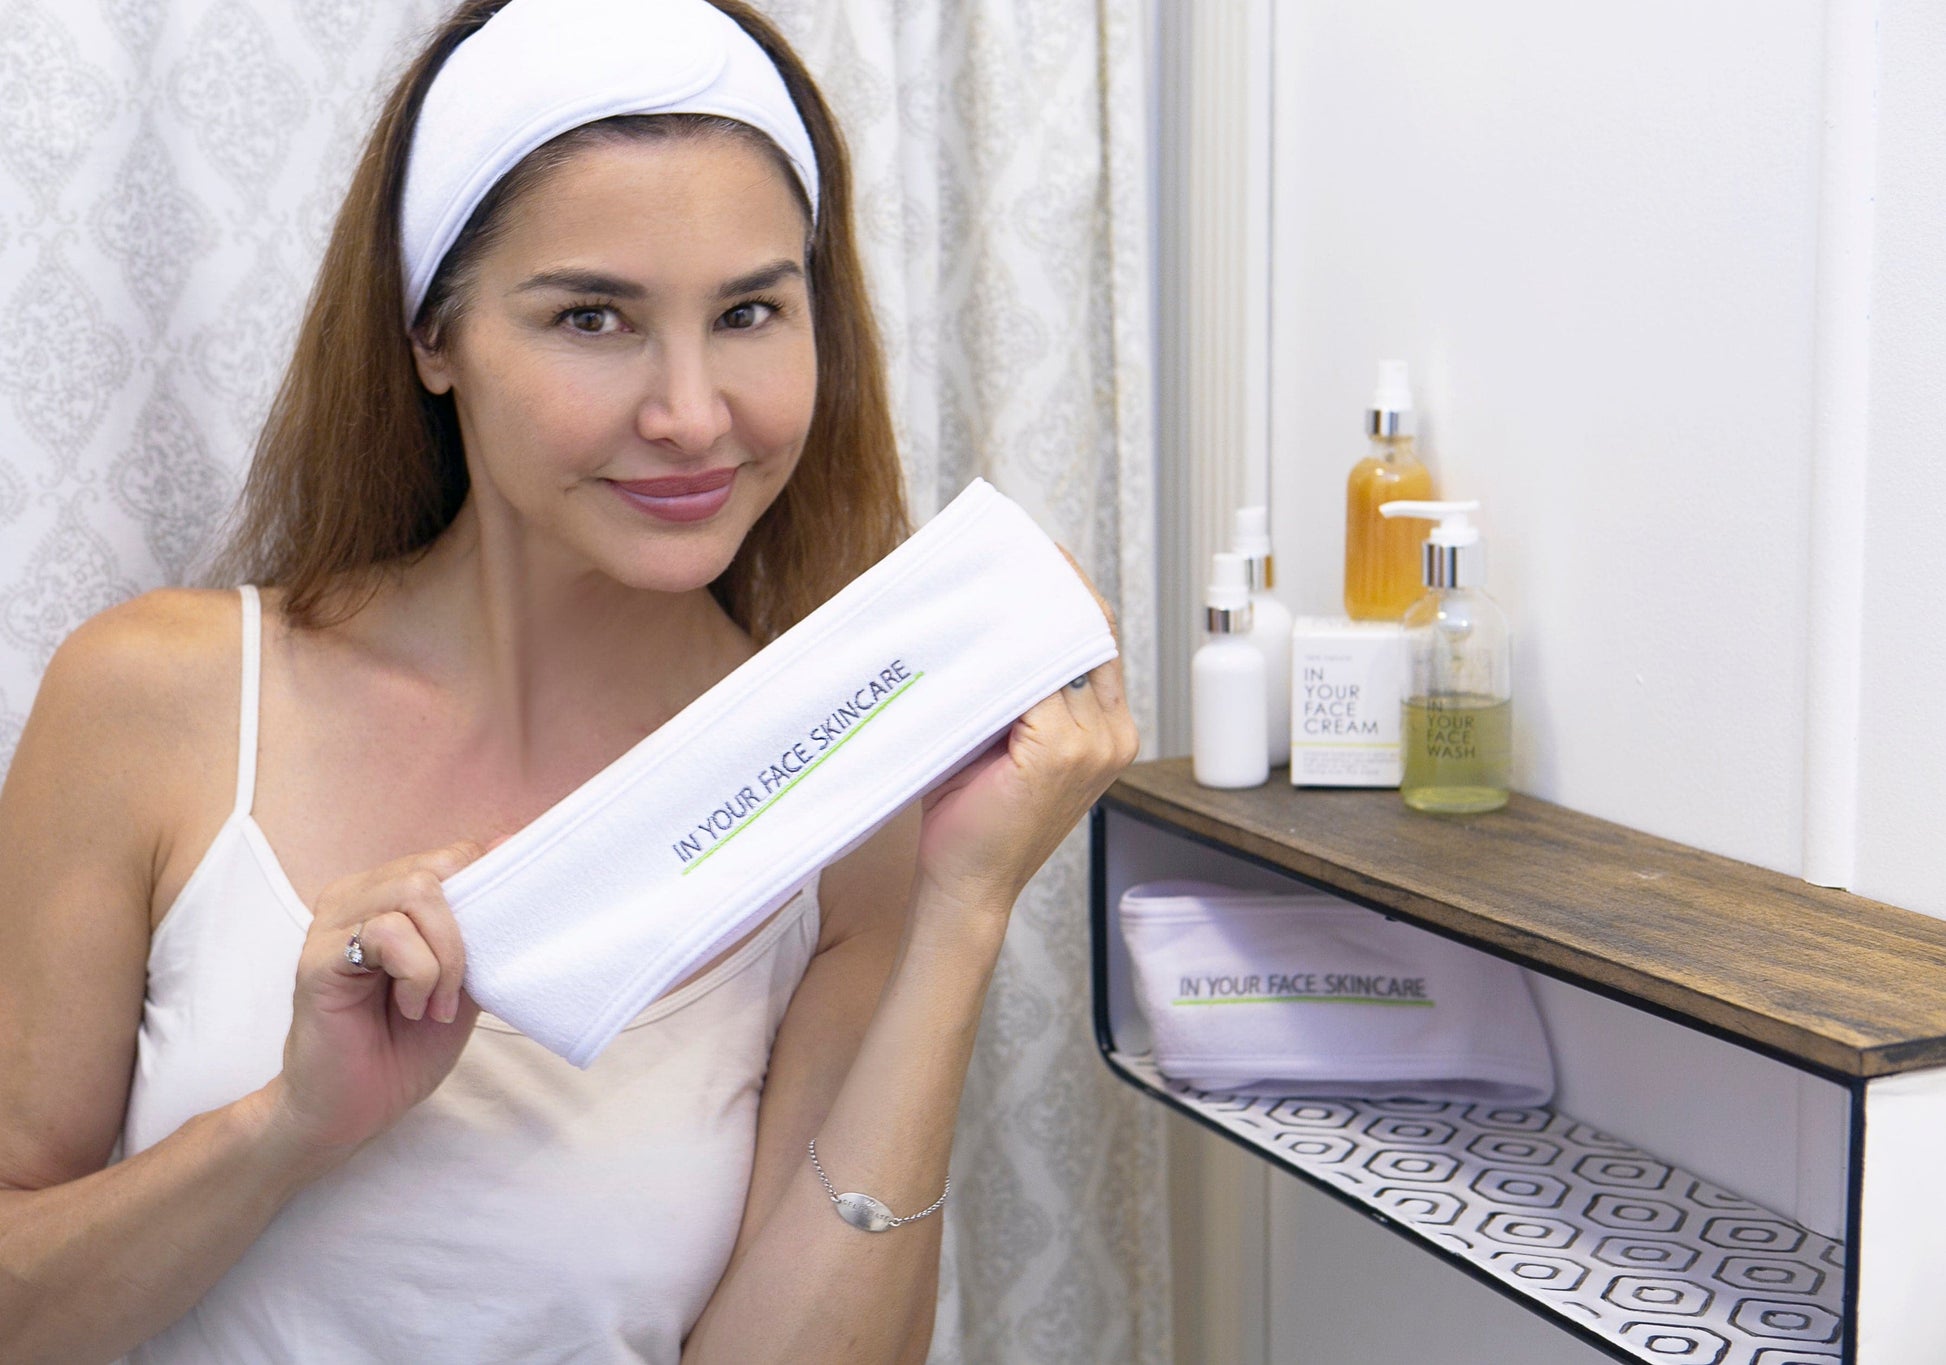 an image of Denice Duff in a bathroom wearing an IN YOUR FACE SKINCARE HAIR WRAP and holding one in her hands. She is next to a shelf with a few skincare products on top.